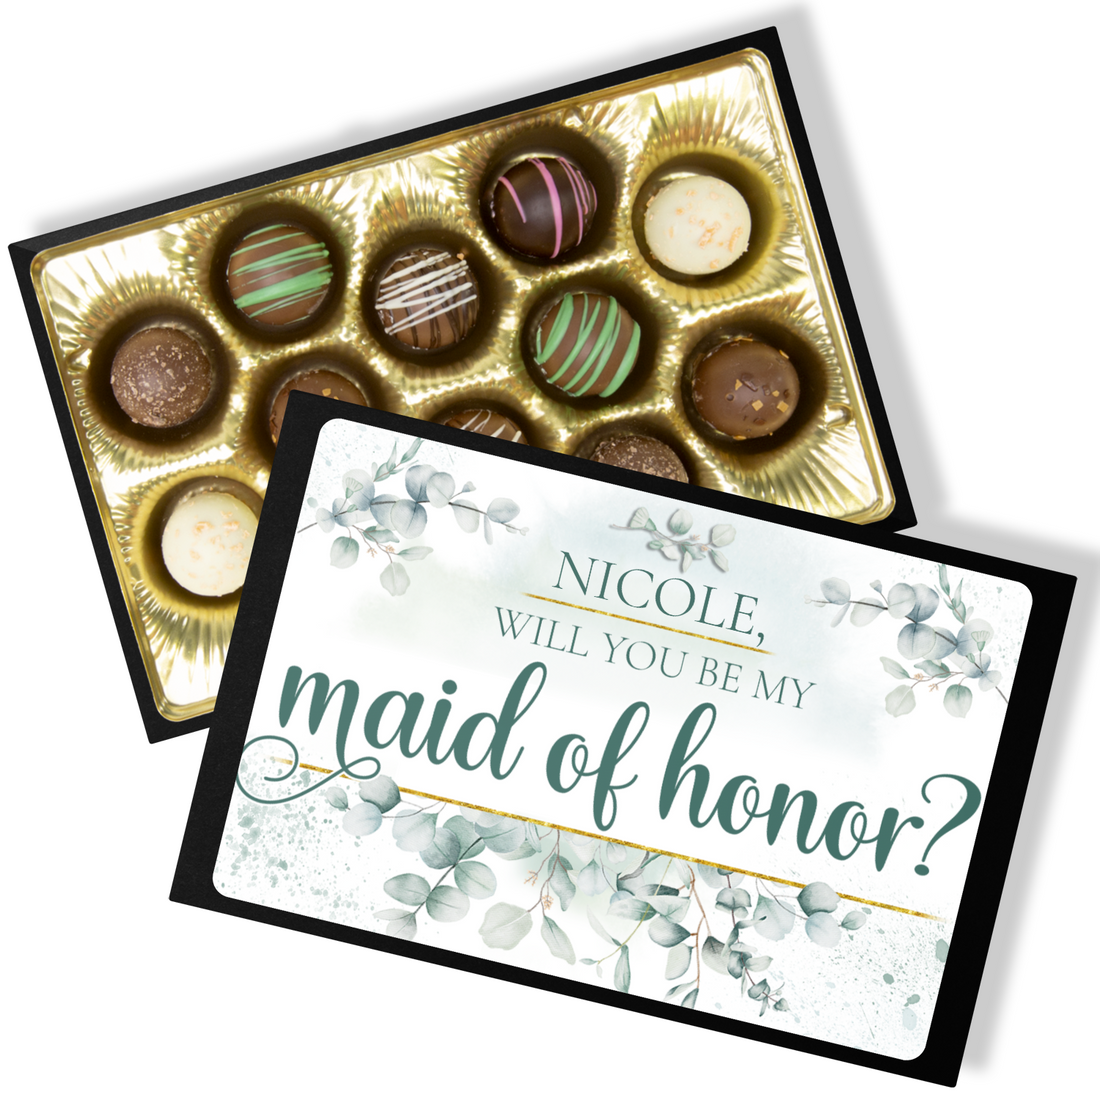 Personalized Will You Be My Maid of Honor Chocolate Box - Handmade Chocolate Truffles - Gift for Maid of Honor - Customized Chocolate Gift